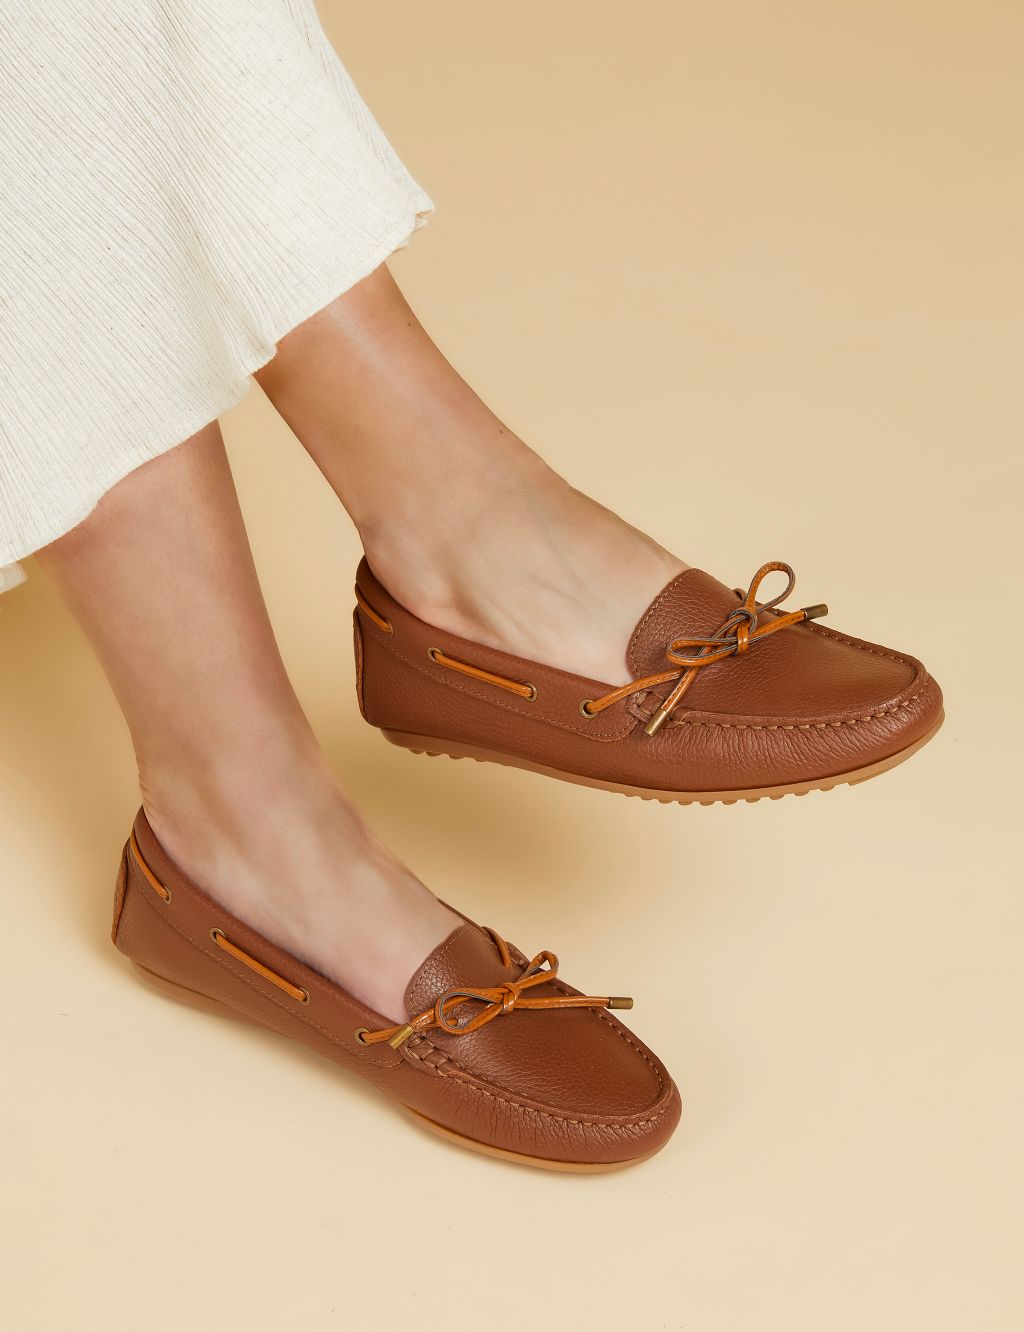 Leather Bow Slip On Flat Boat Shoes 2 of 7